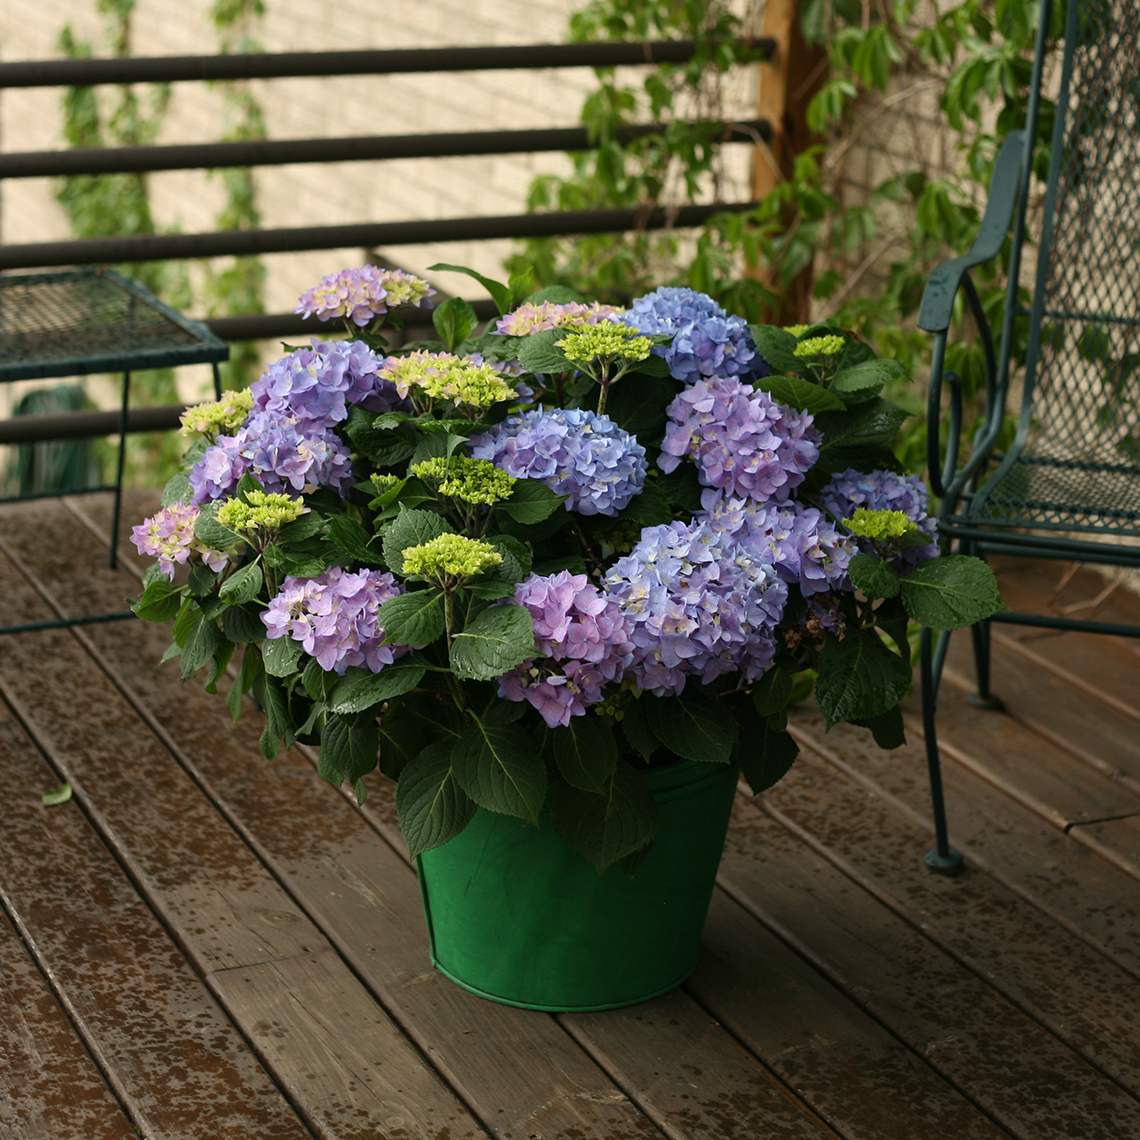 Let's Dance Rhythmic Blue hydrangea in green decorative container on wooden deck